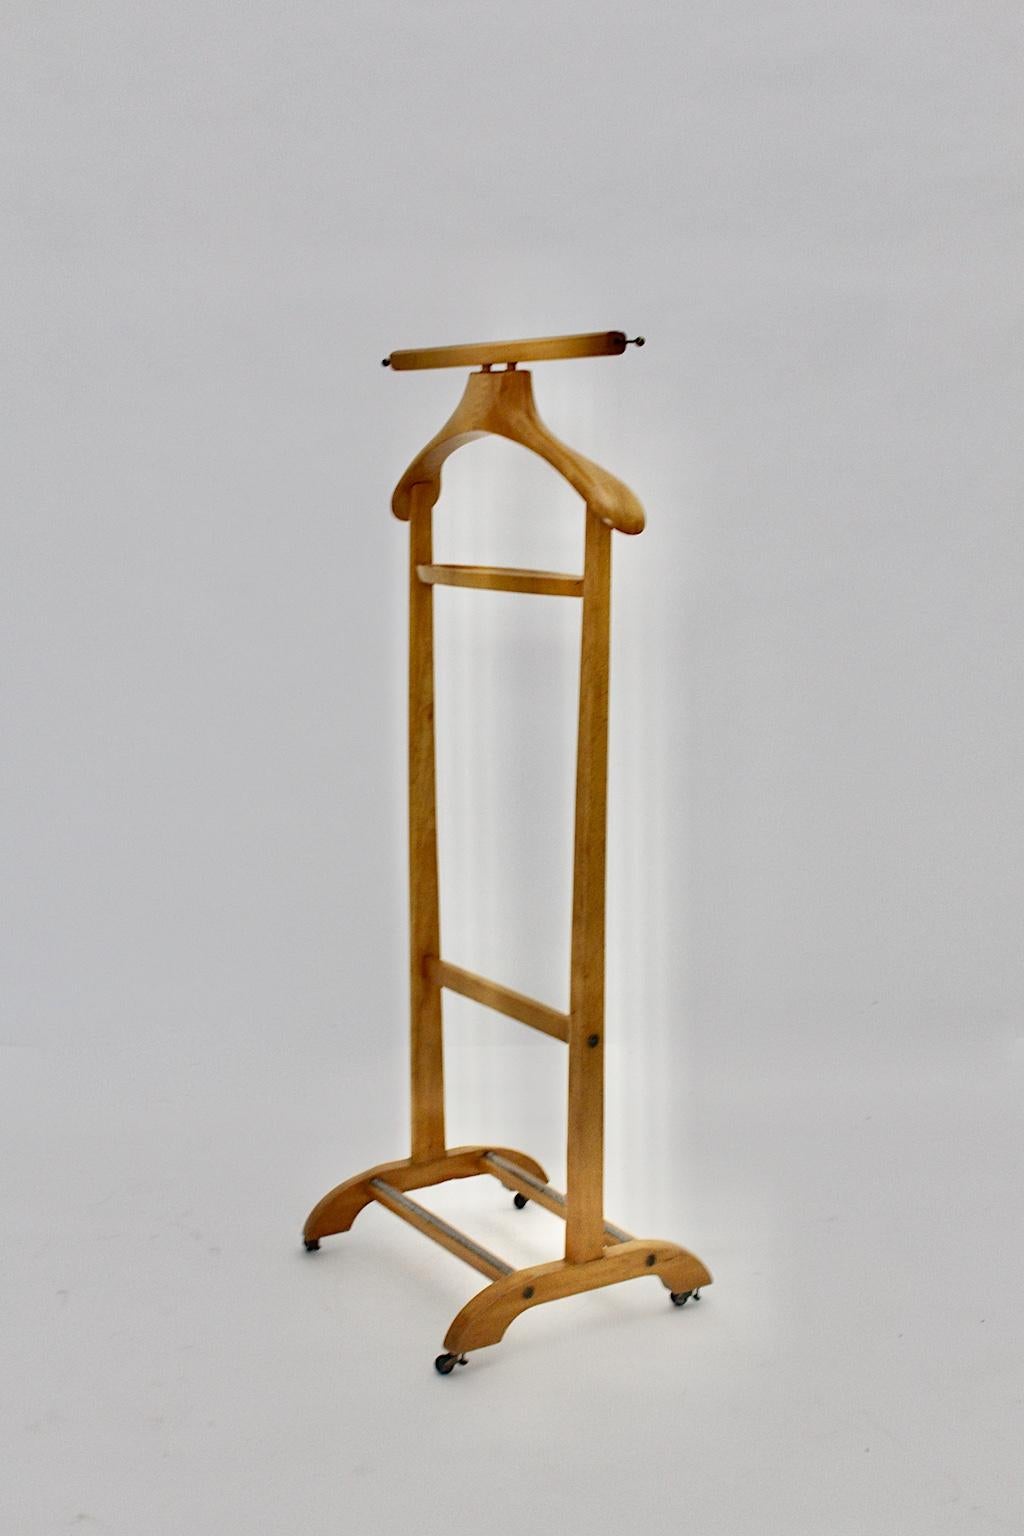 A Mid-Century Modern vintage beech valet, in the style of Ico and Luisa Parisi, by Reguitti, circa 1958, Italy and manufactured by Fratelli Reguitti, Italy. The manufacturer name is stamped into the wood.
The valet was made out of solid beech with